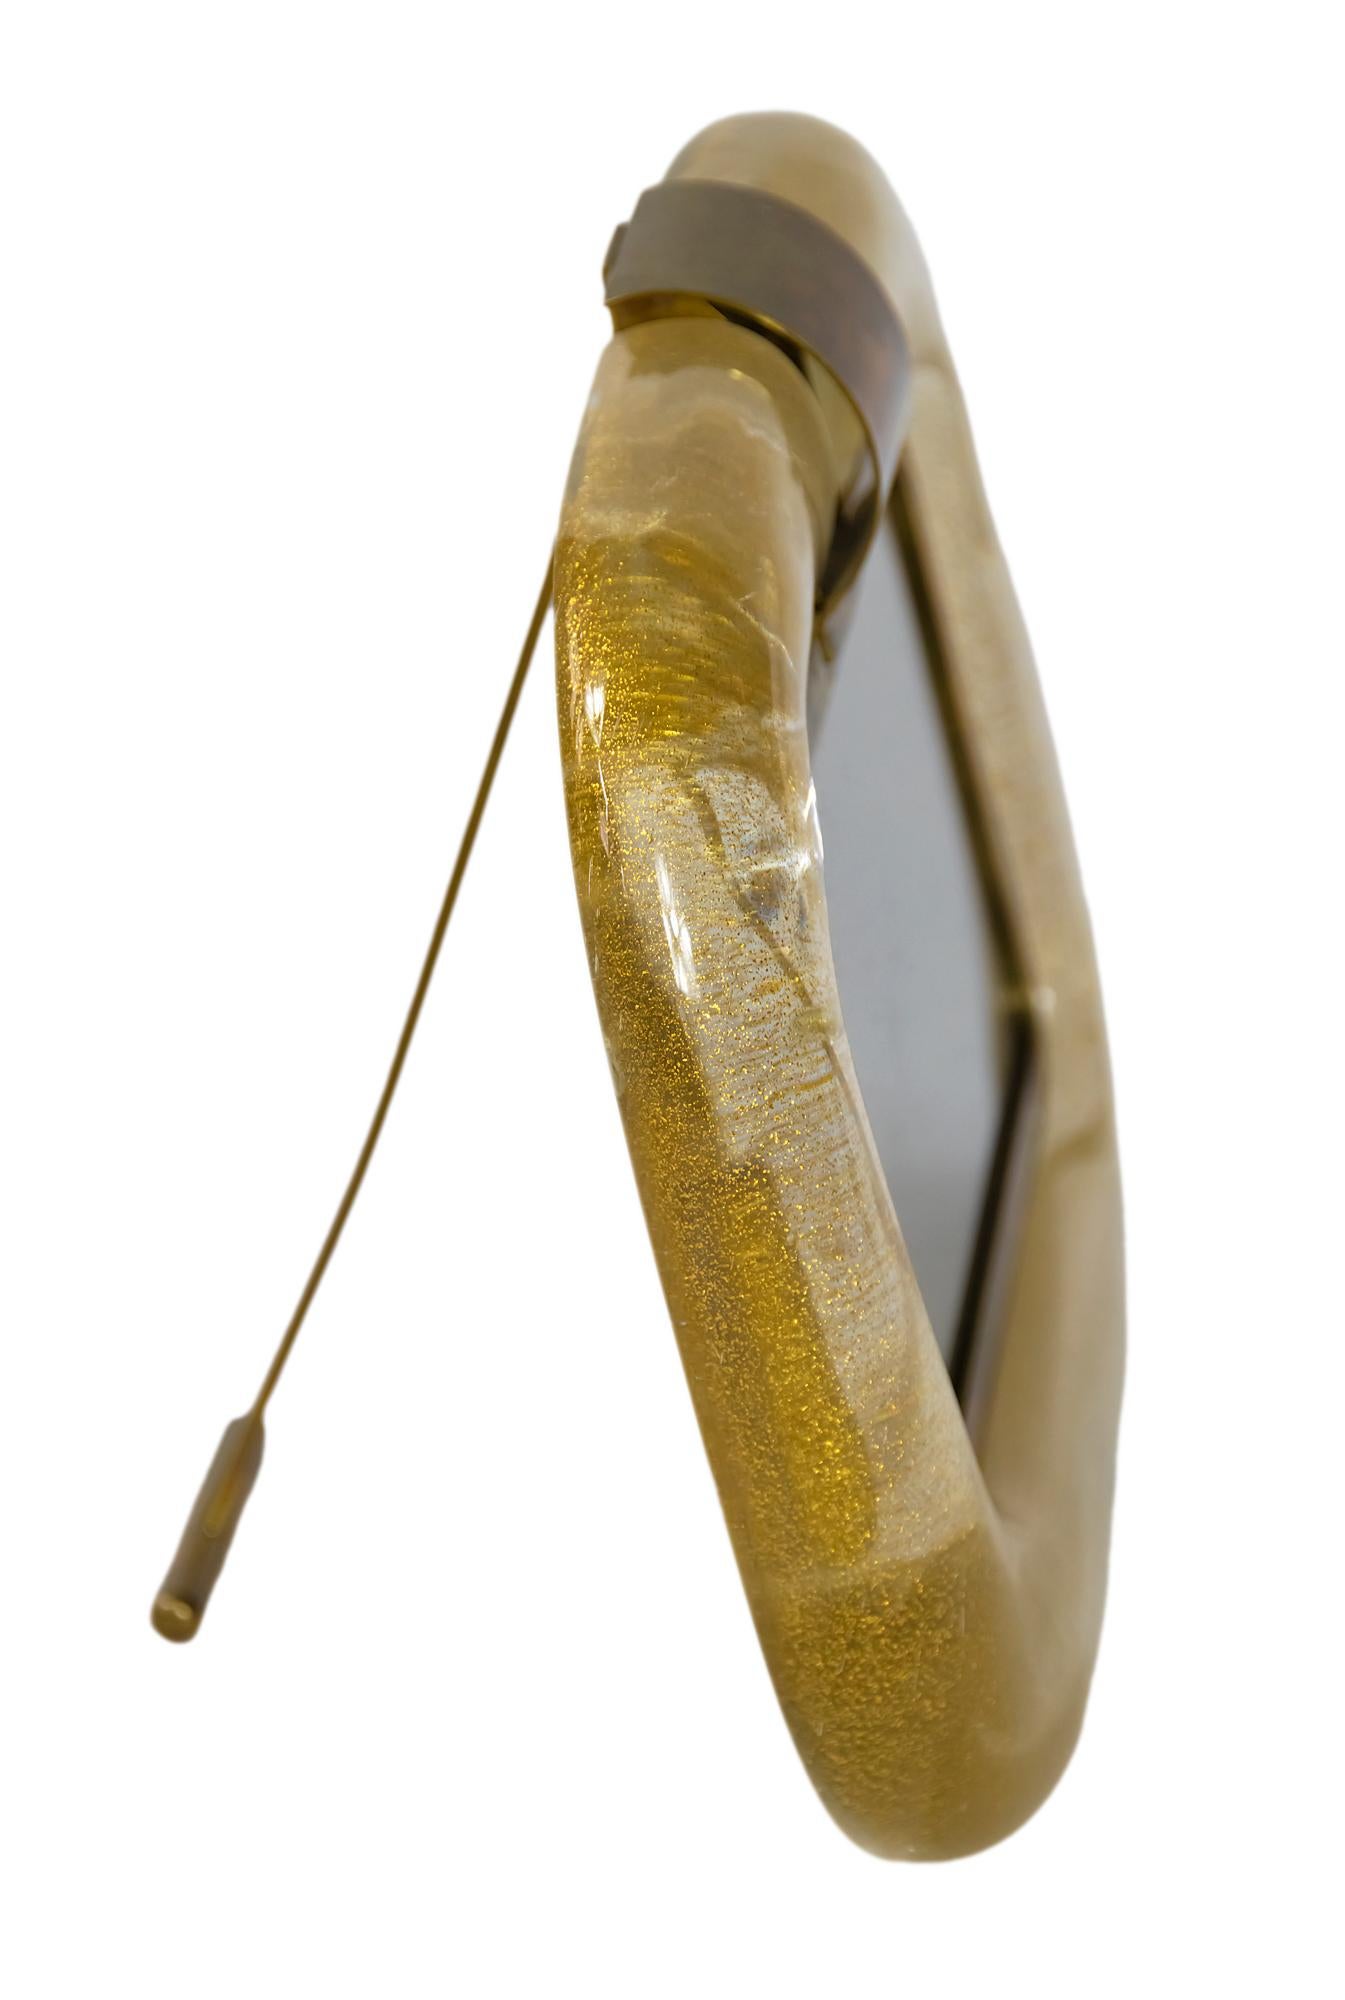 Italian Murano blown glass and brass photo frame by Tommaso Barbi from 1960's.
The glass is handmade, blown, transparent with gold dust and spiral facture inside.
Signed Tommaso Barbi made in Italy.
  